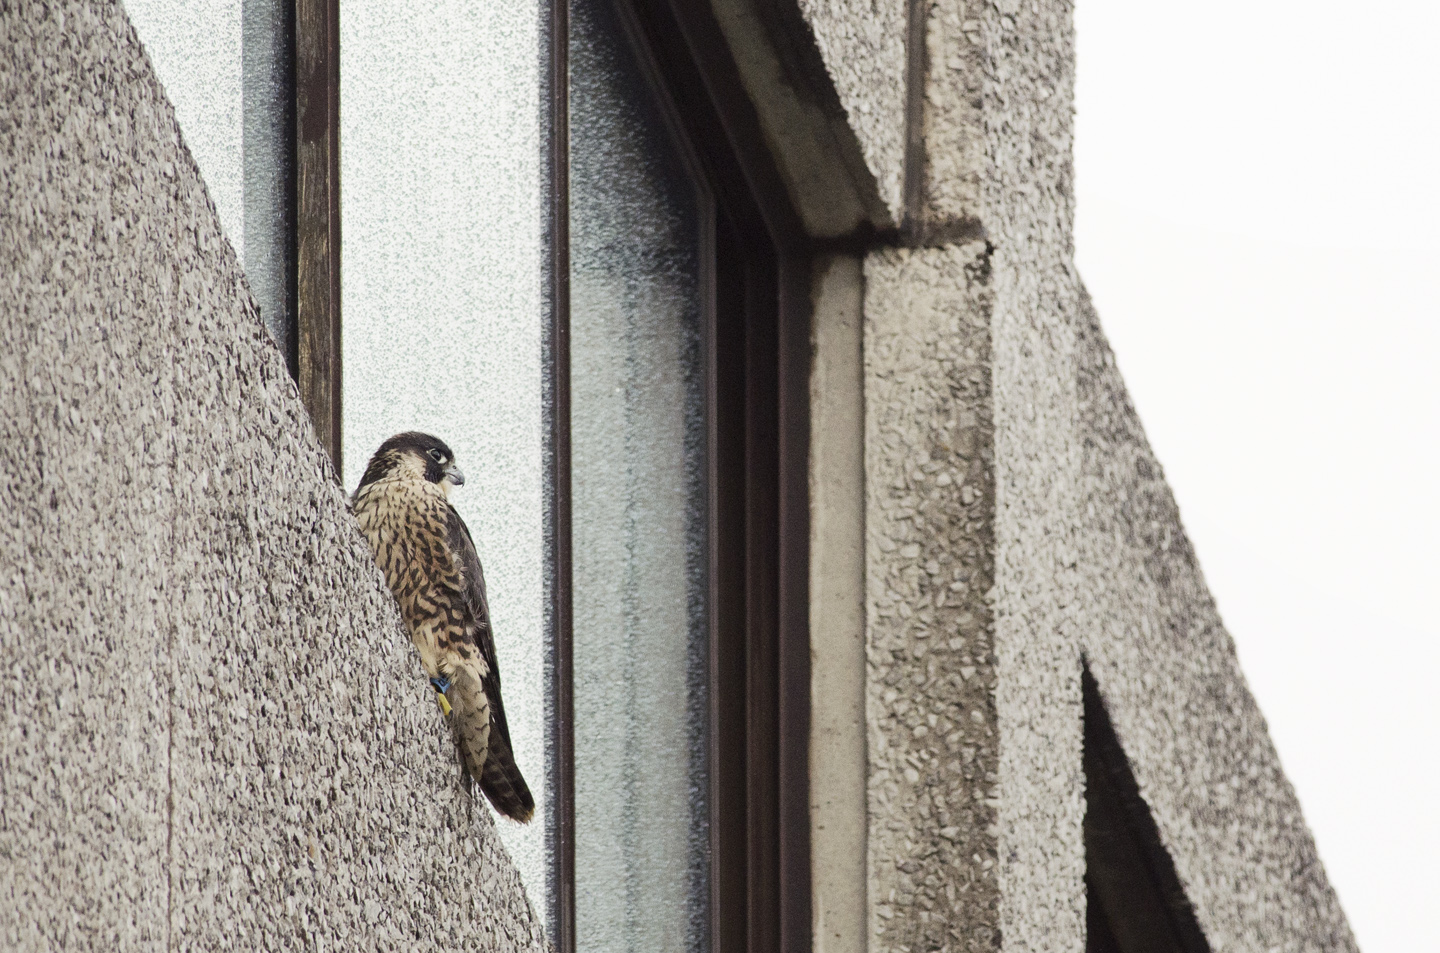  Juvenile peregrines blend in to the urban environment as well as they do a coastal cliff - the habitat is surprisingly similar, with its tall rocky outcrops inhabited by gulls and pigeons 